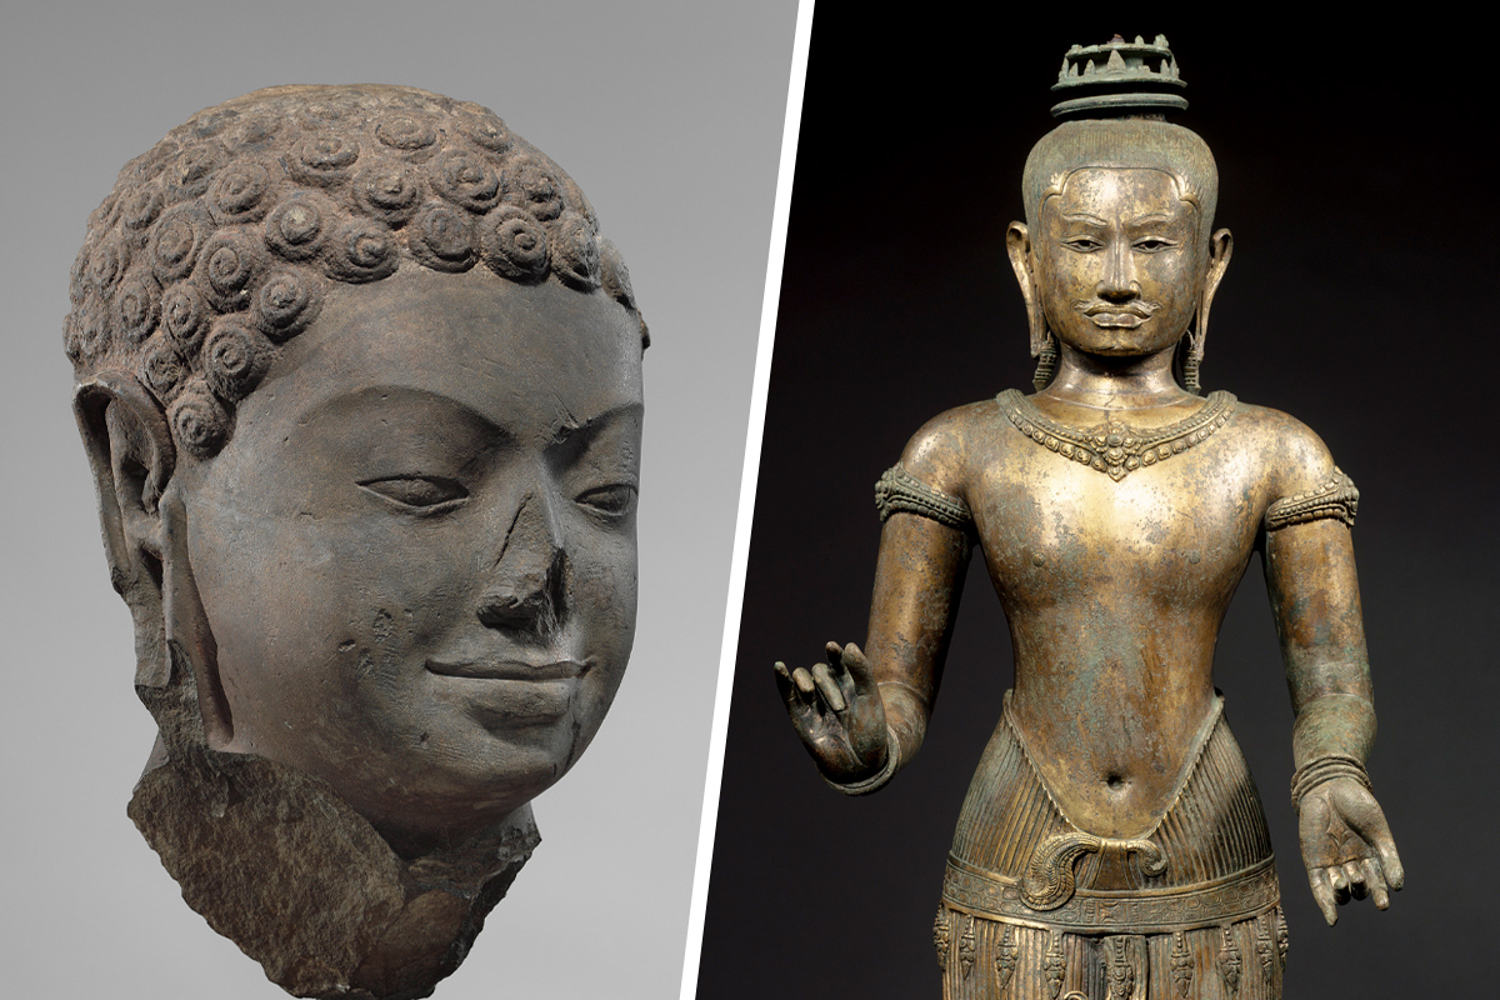 New York’s Metropolitan Museum will return stolen ancient sculptures to Cambodia and Thailand